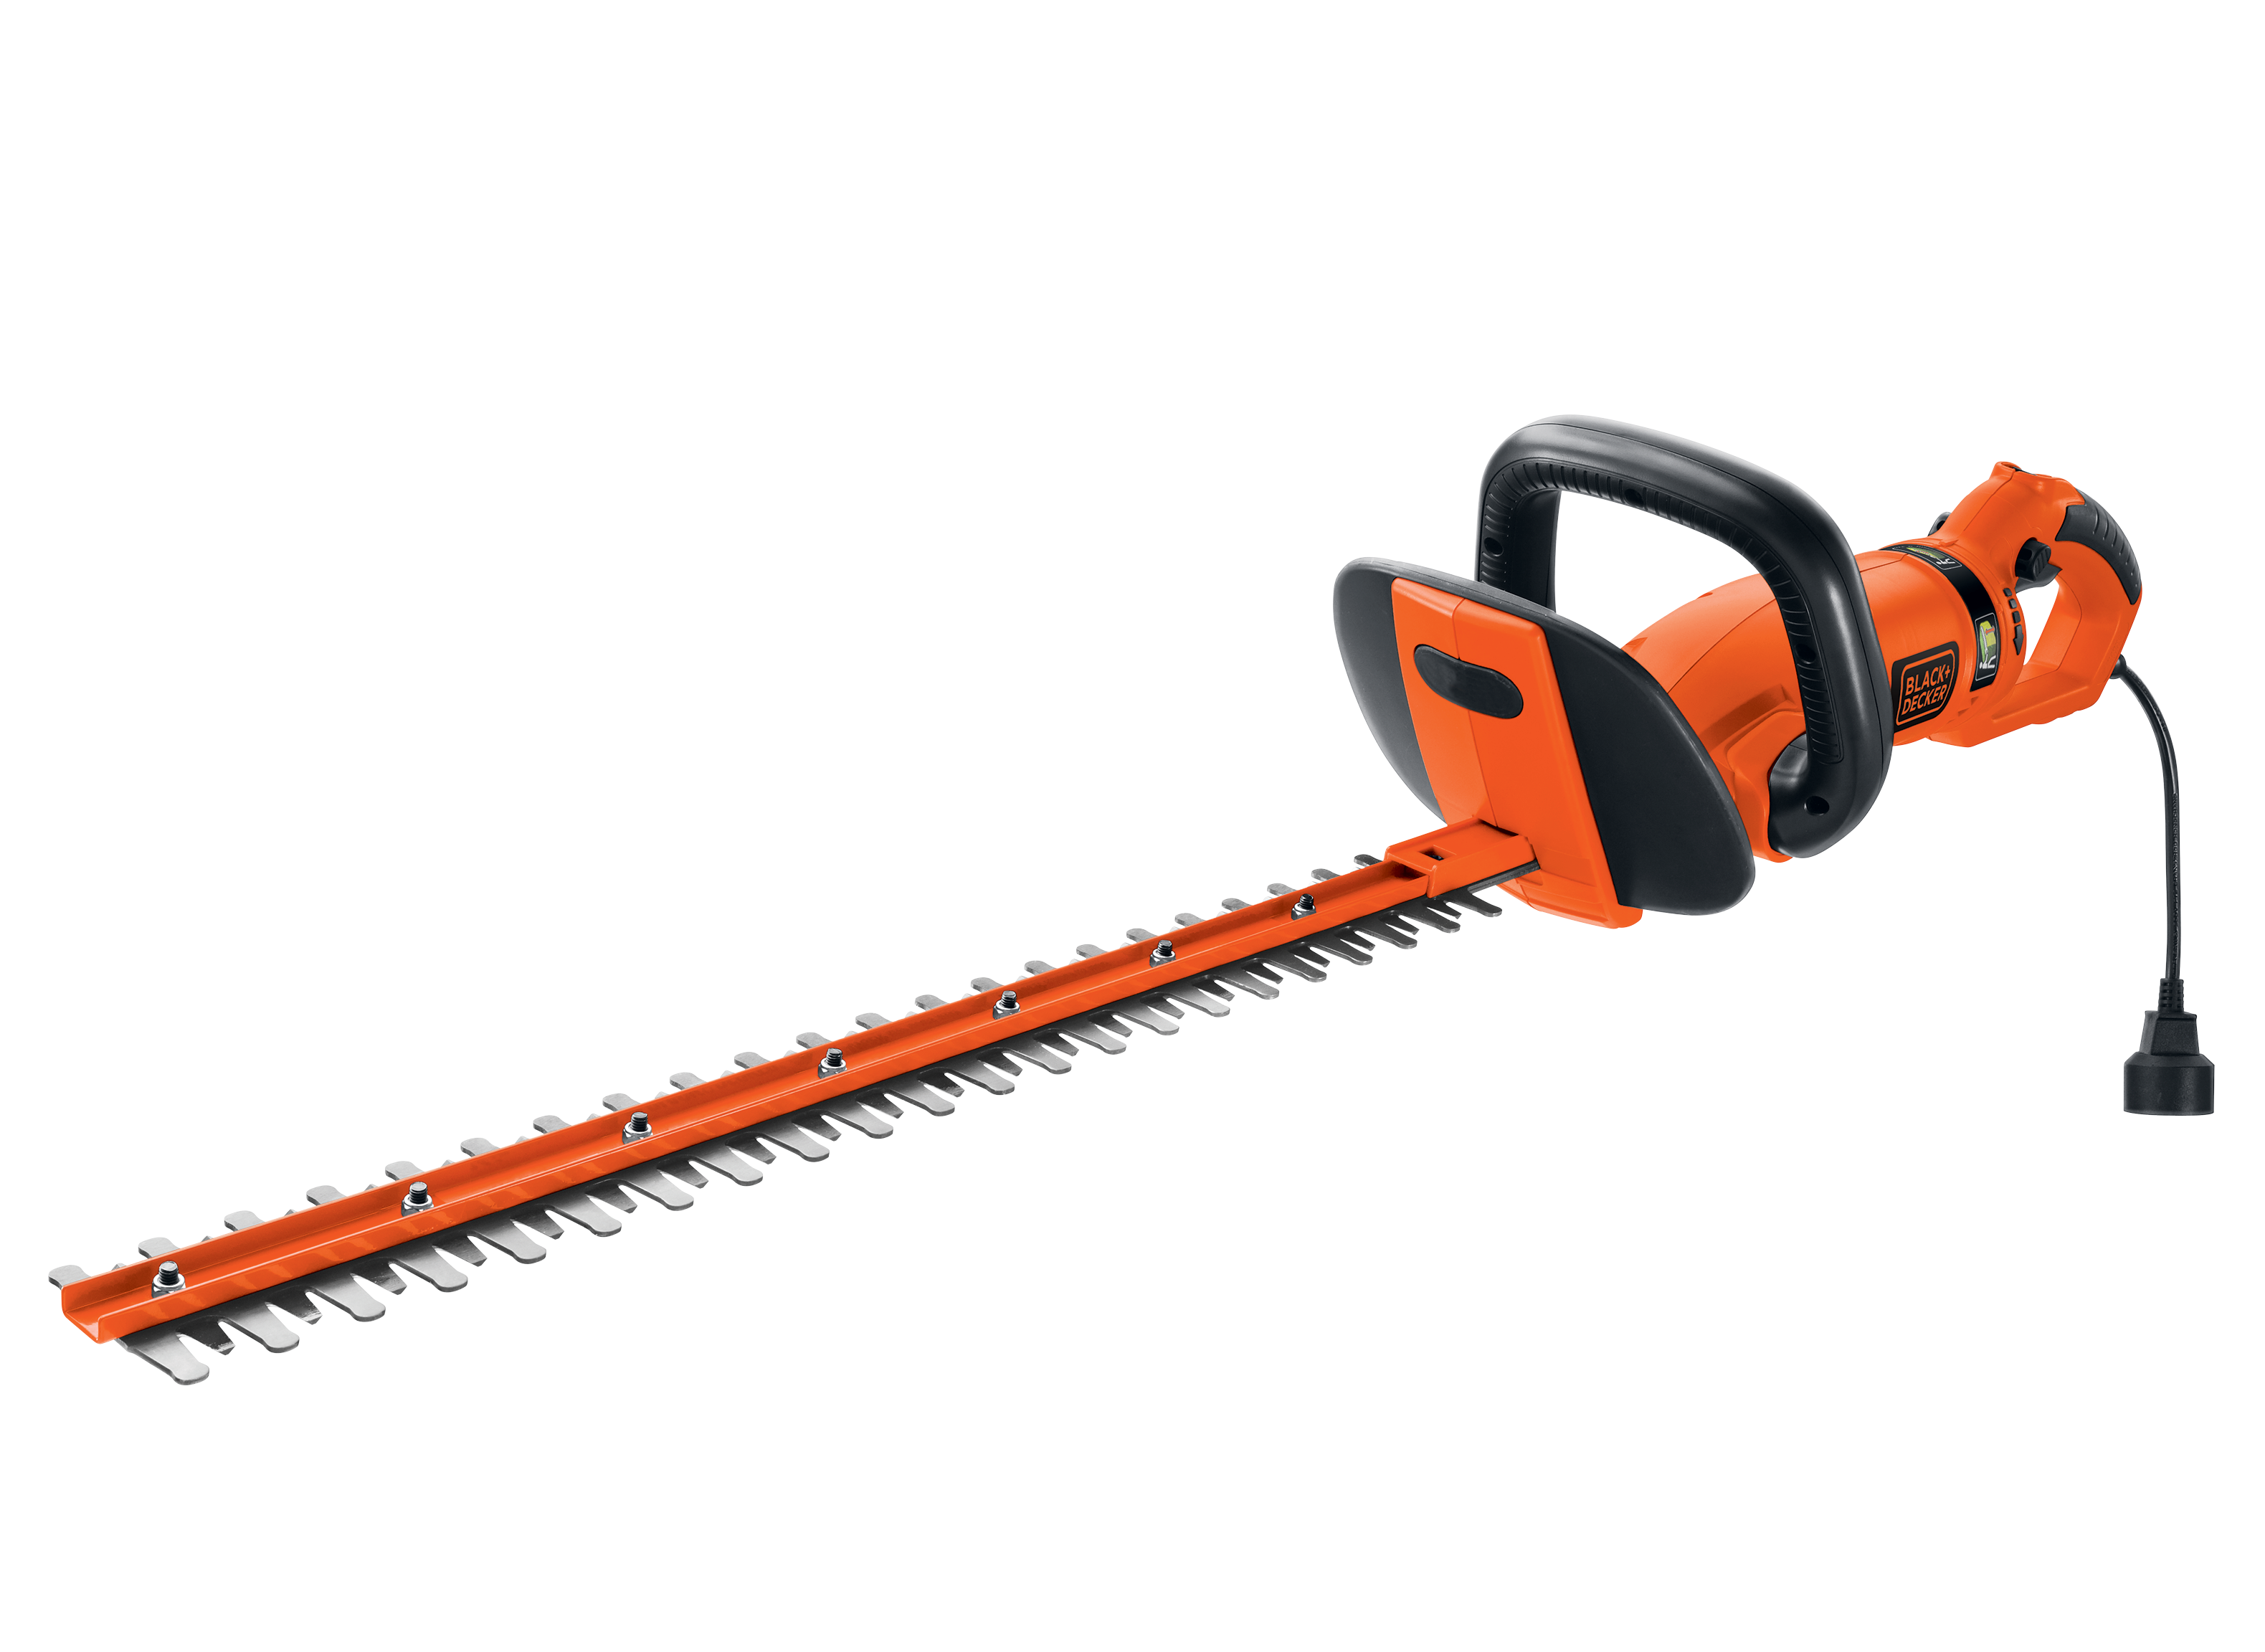 https://crdms.images.consumerreports.org/prod/products/cr/models/405487-hedge-trimmers-black-decker-hh2455-10025975.png